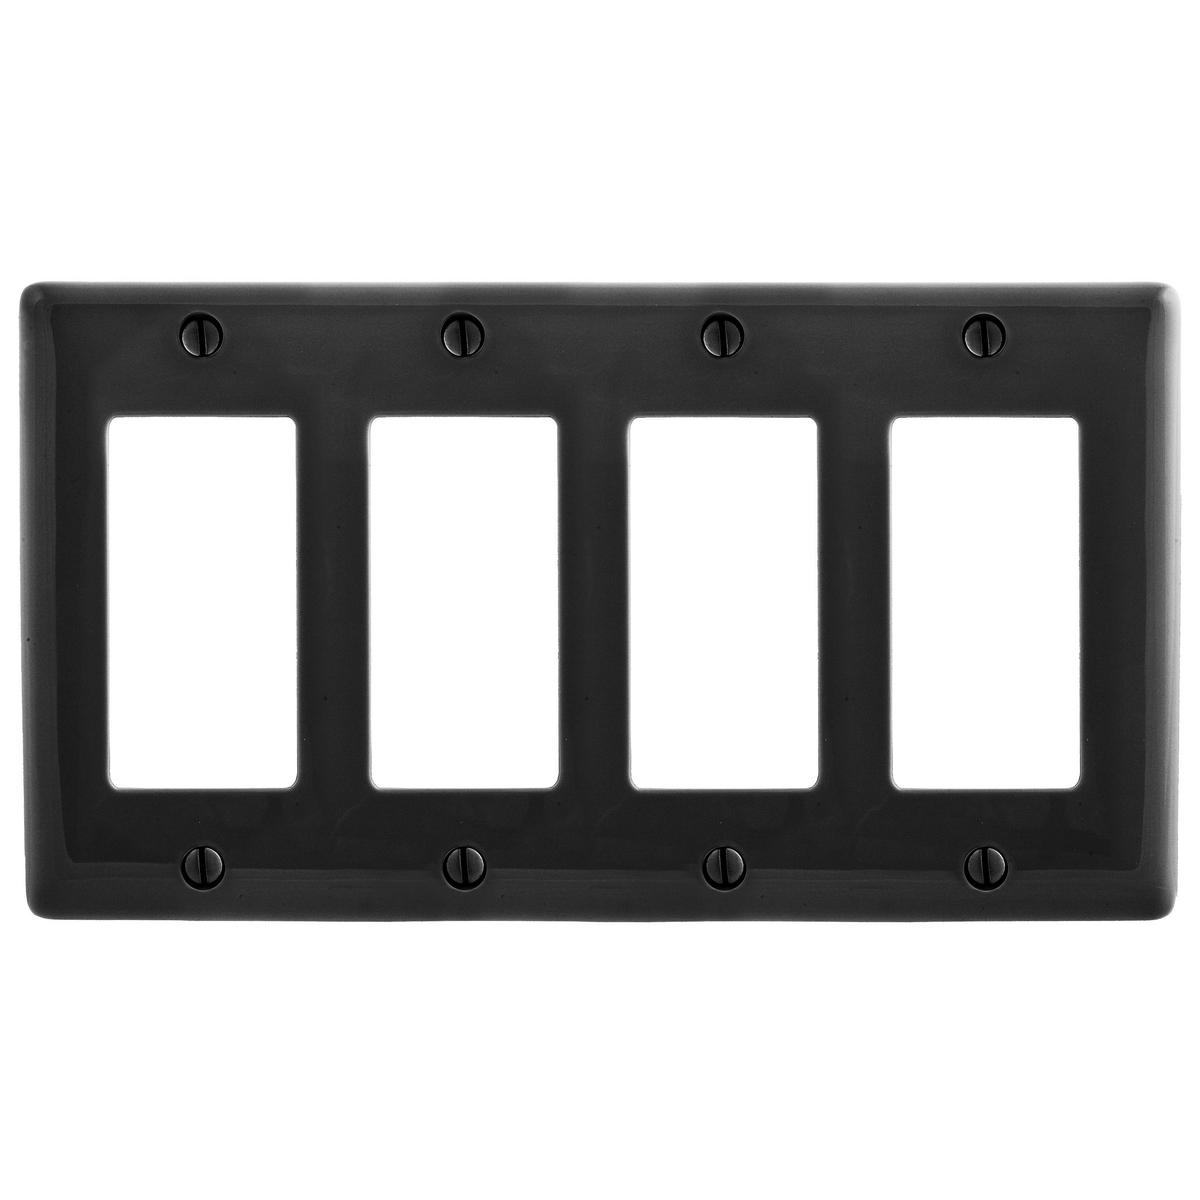 Hubbell NPJ264BK Wallplates, Nylon, Mid-Sized, 2-Gang, 2) Decorator, Black  ; Reinforcement ribs for extra strength ; Curved corners for improved aesthetics ; High-impact, self-extinguishing nylon material ; Standard Size is 1/8" larger to give you extra coverage to hide 